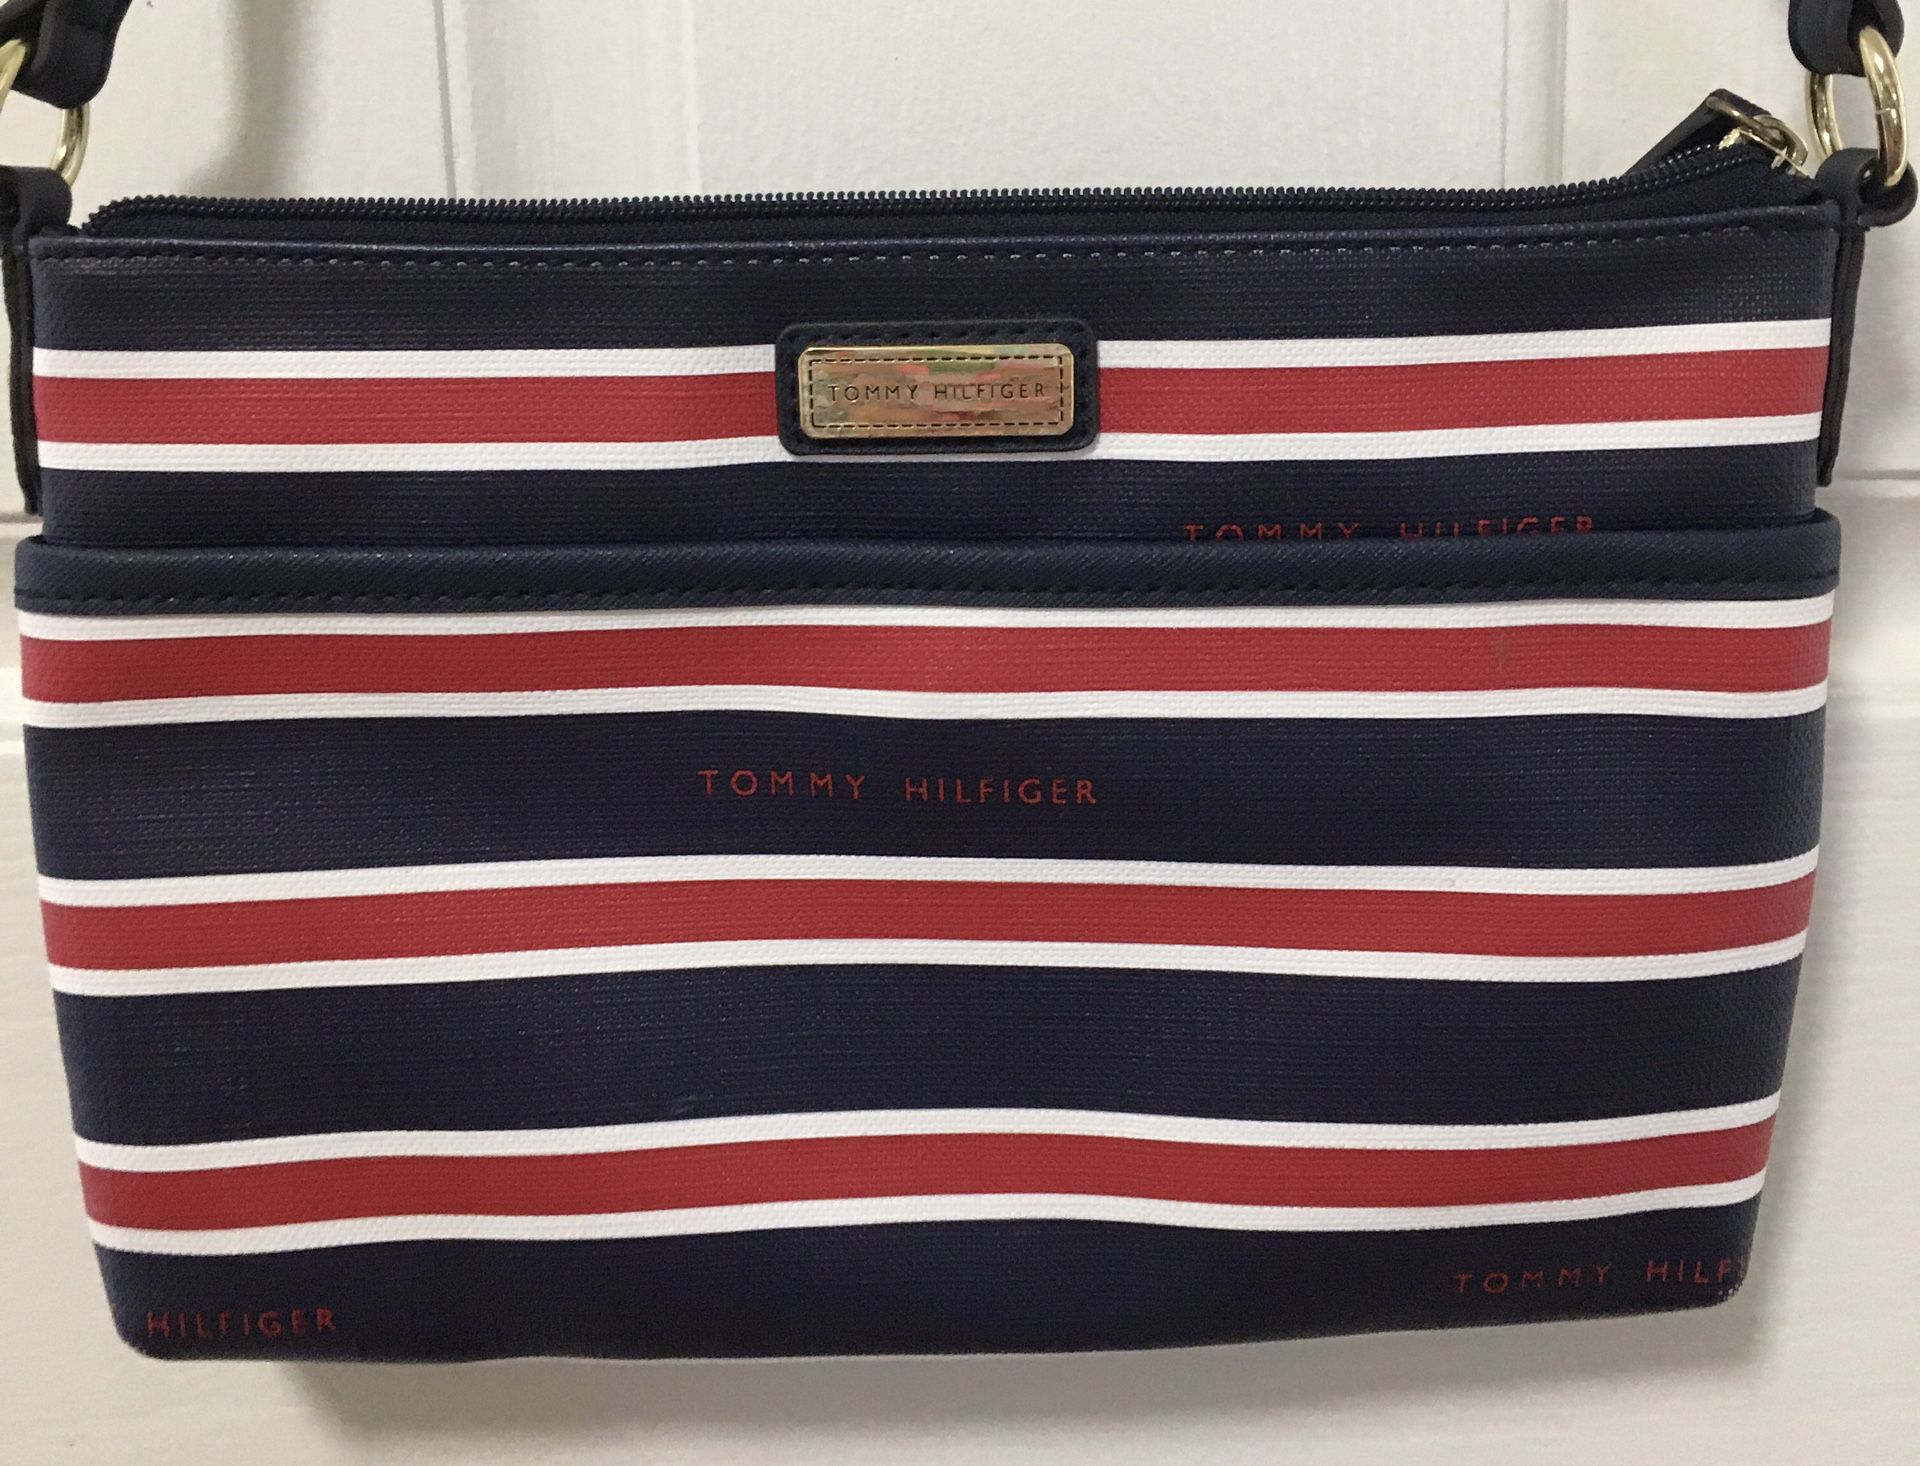 Tommy Hilfiger Red, White and Blue Stripes